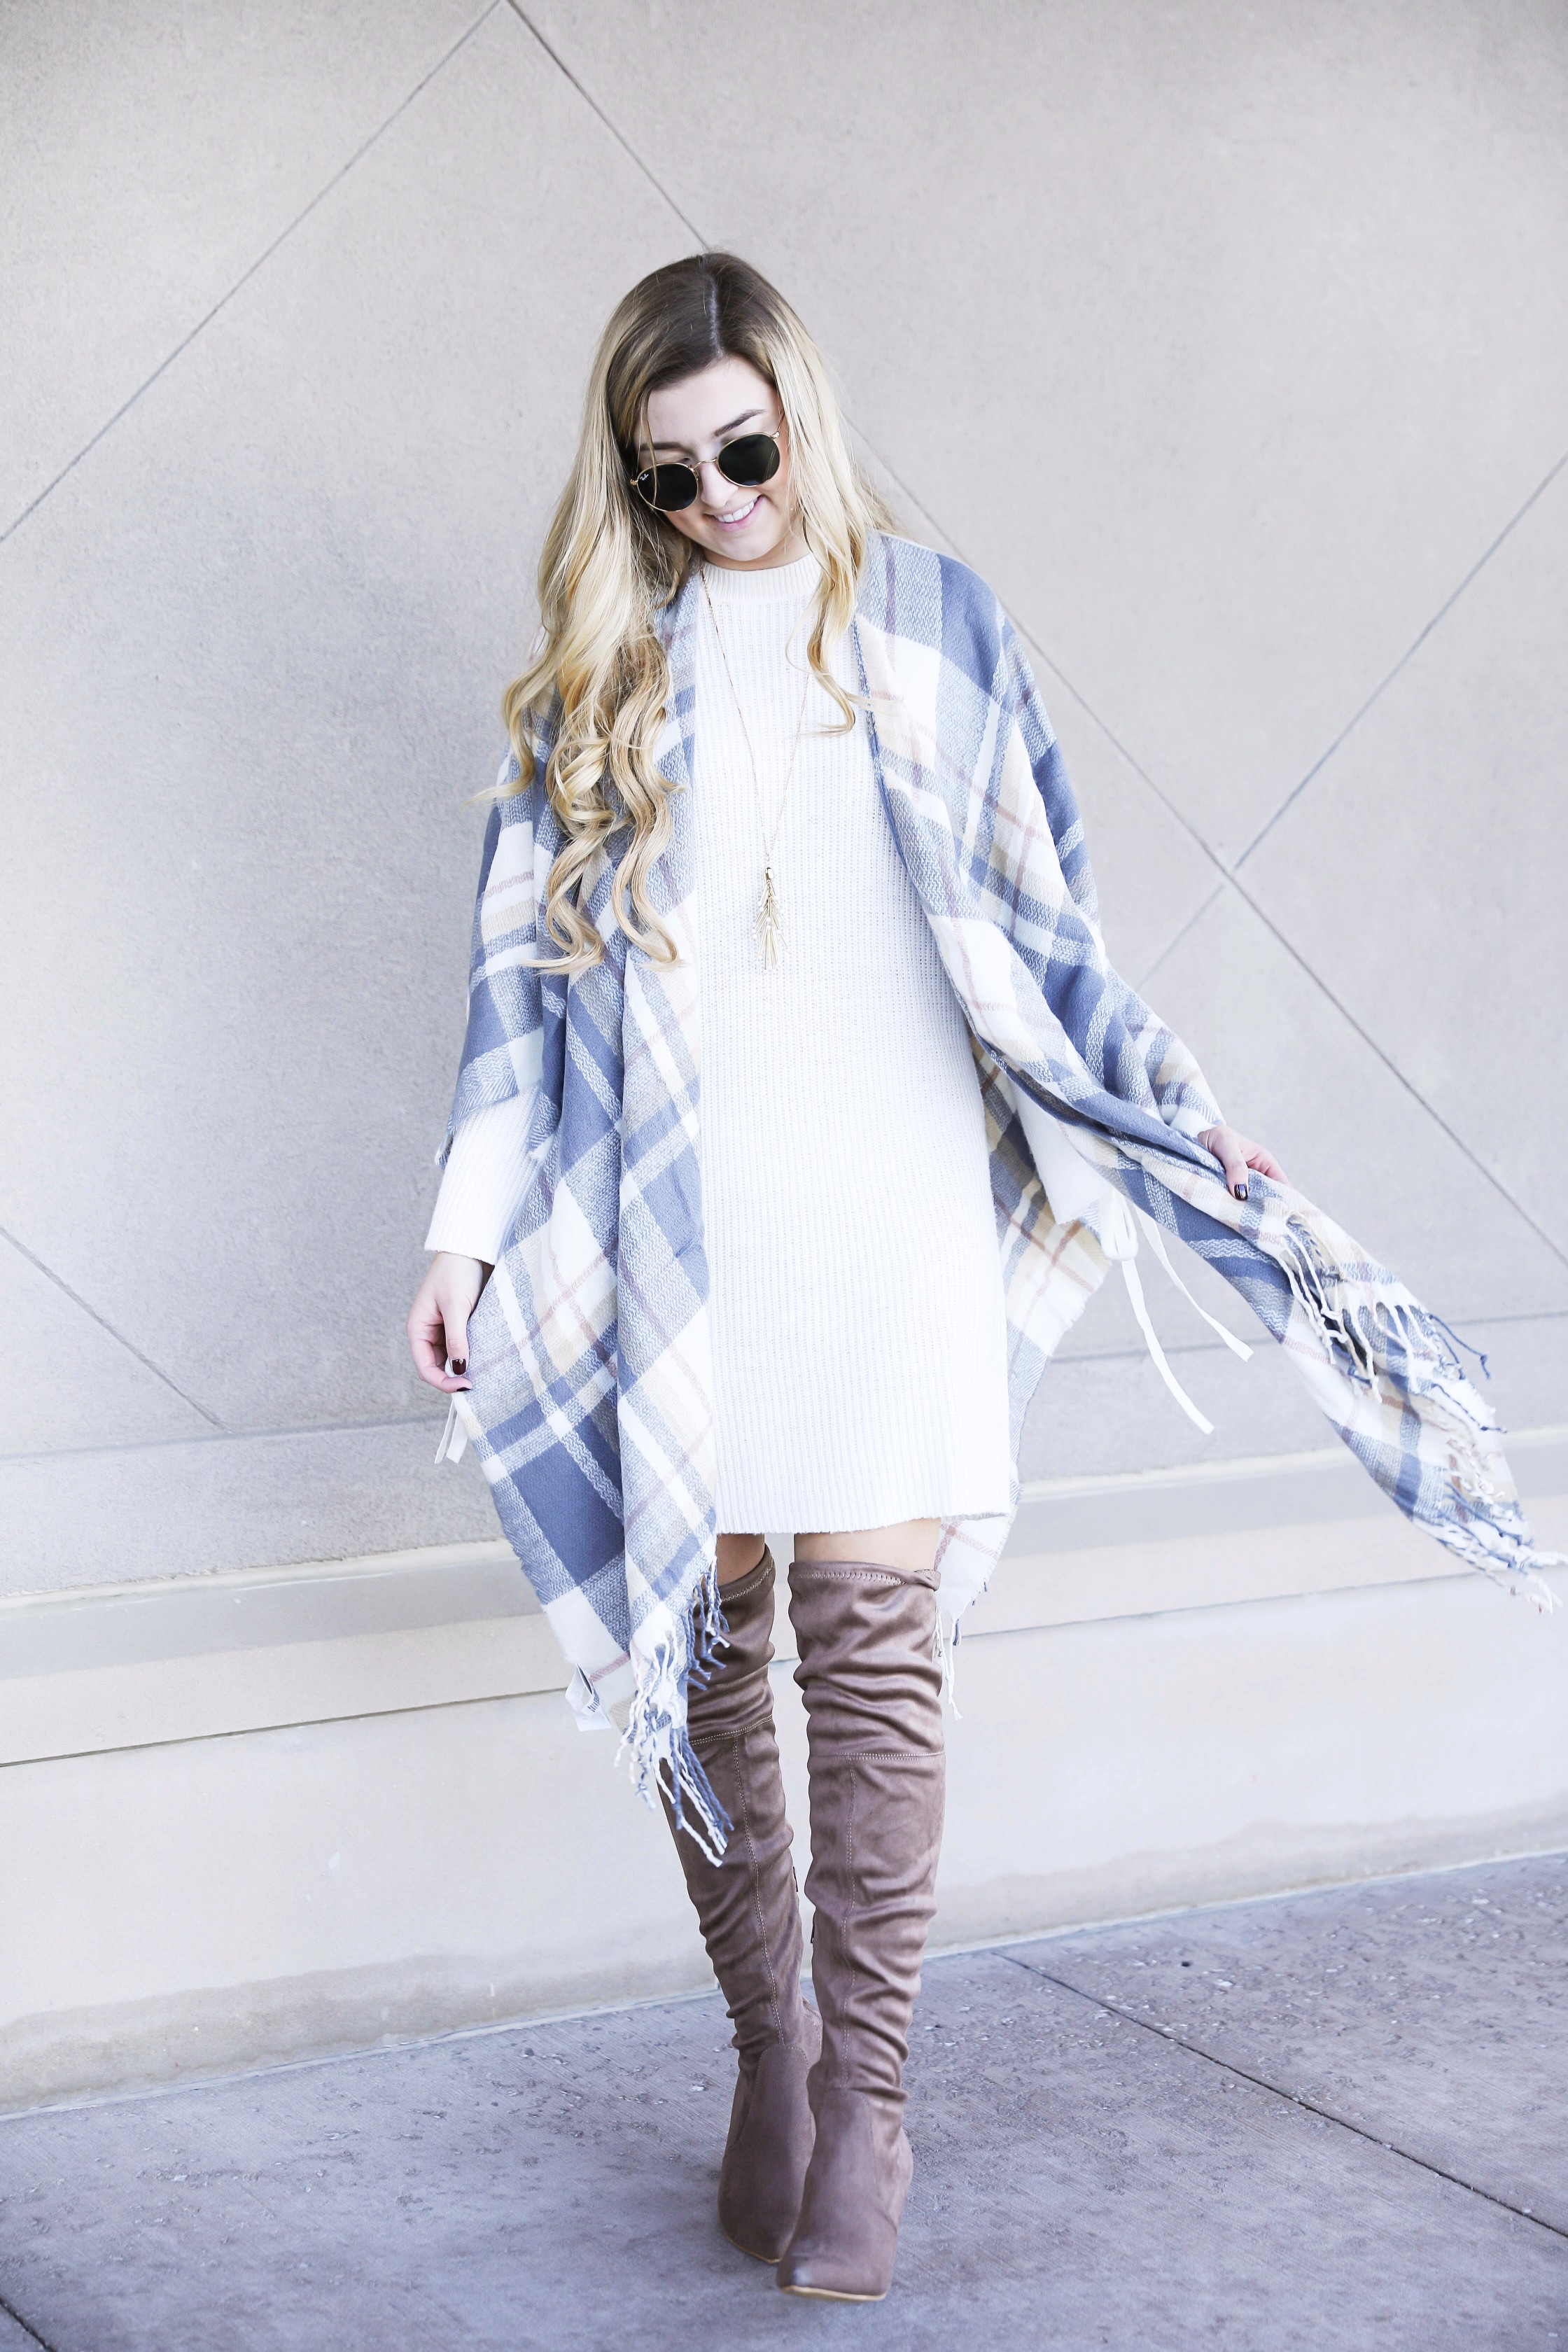 Plaid poncho and cute white sweater dress with tied sleeves! Cutest fall outfit! Check out the details on fashion blog daily dose of charm by lauren lindmark